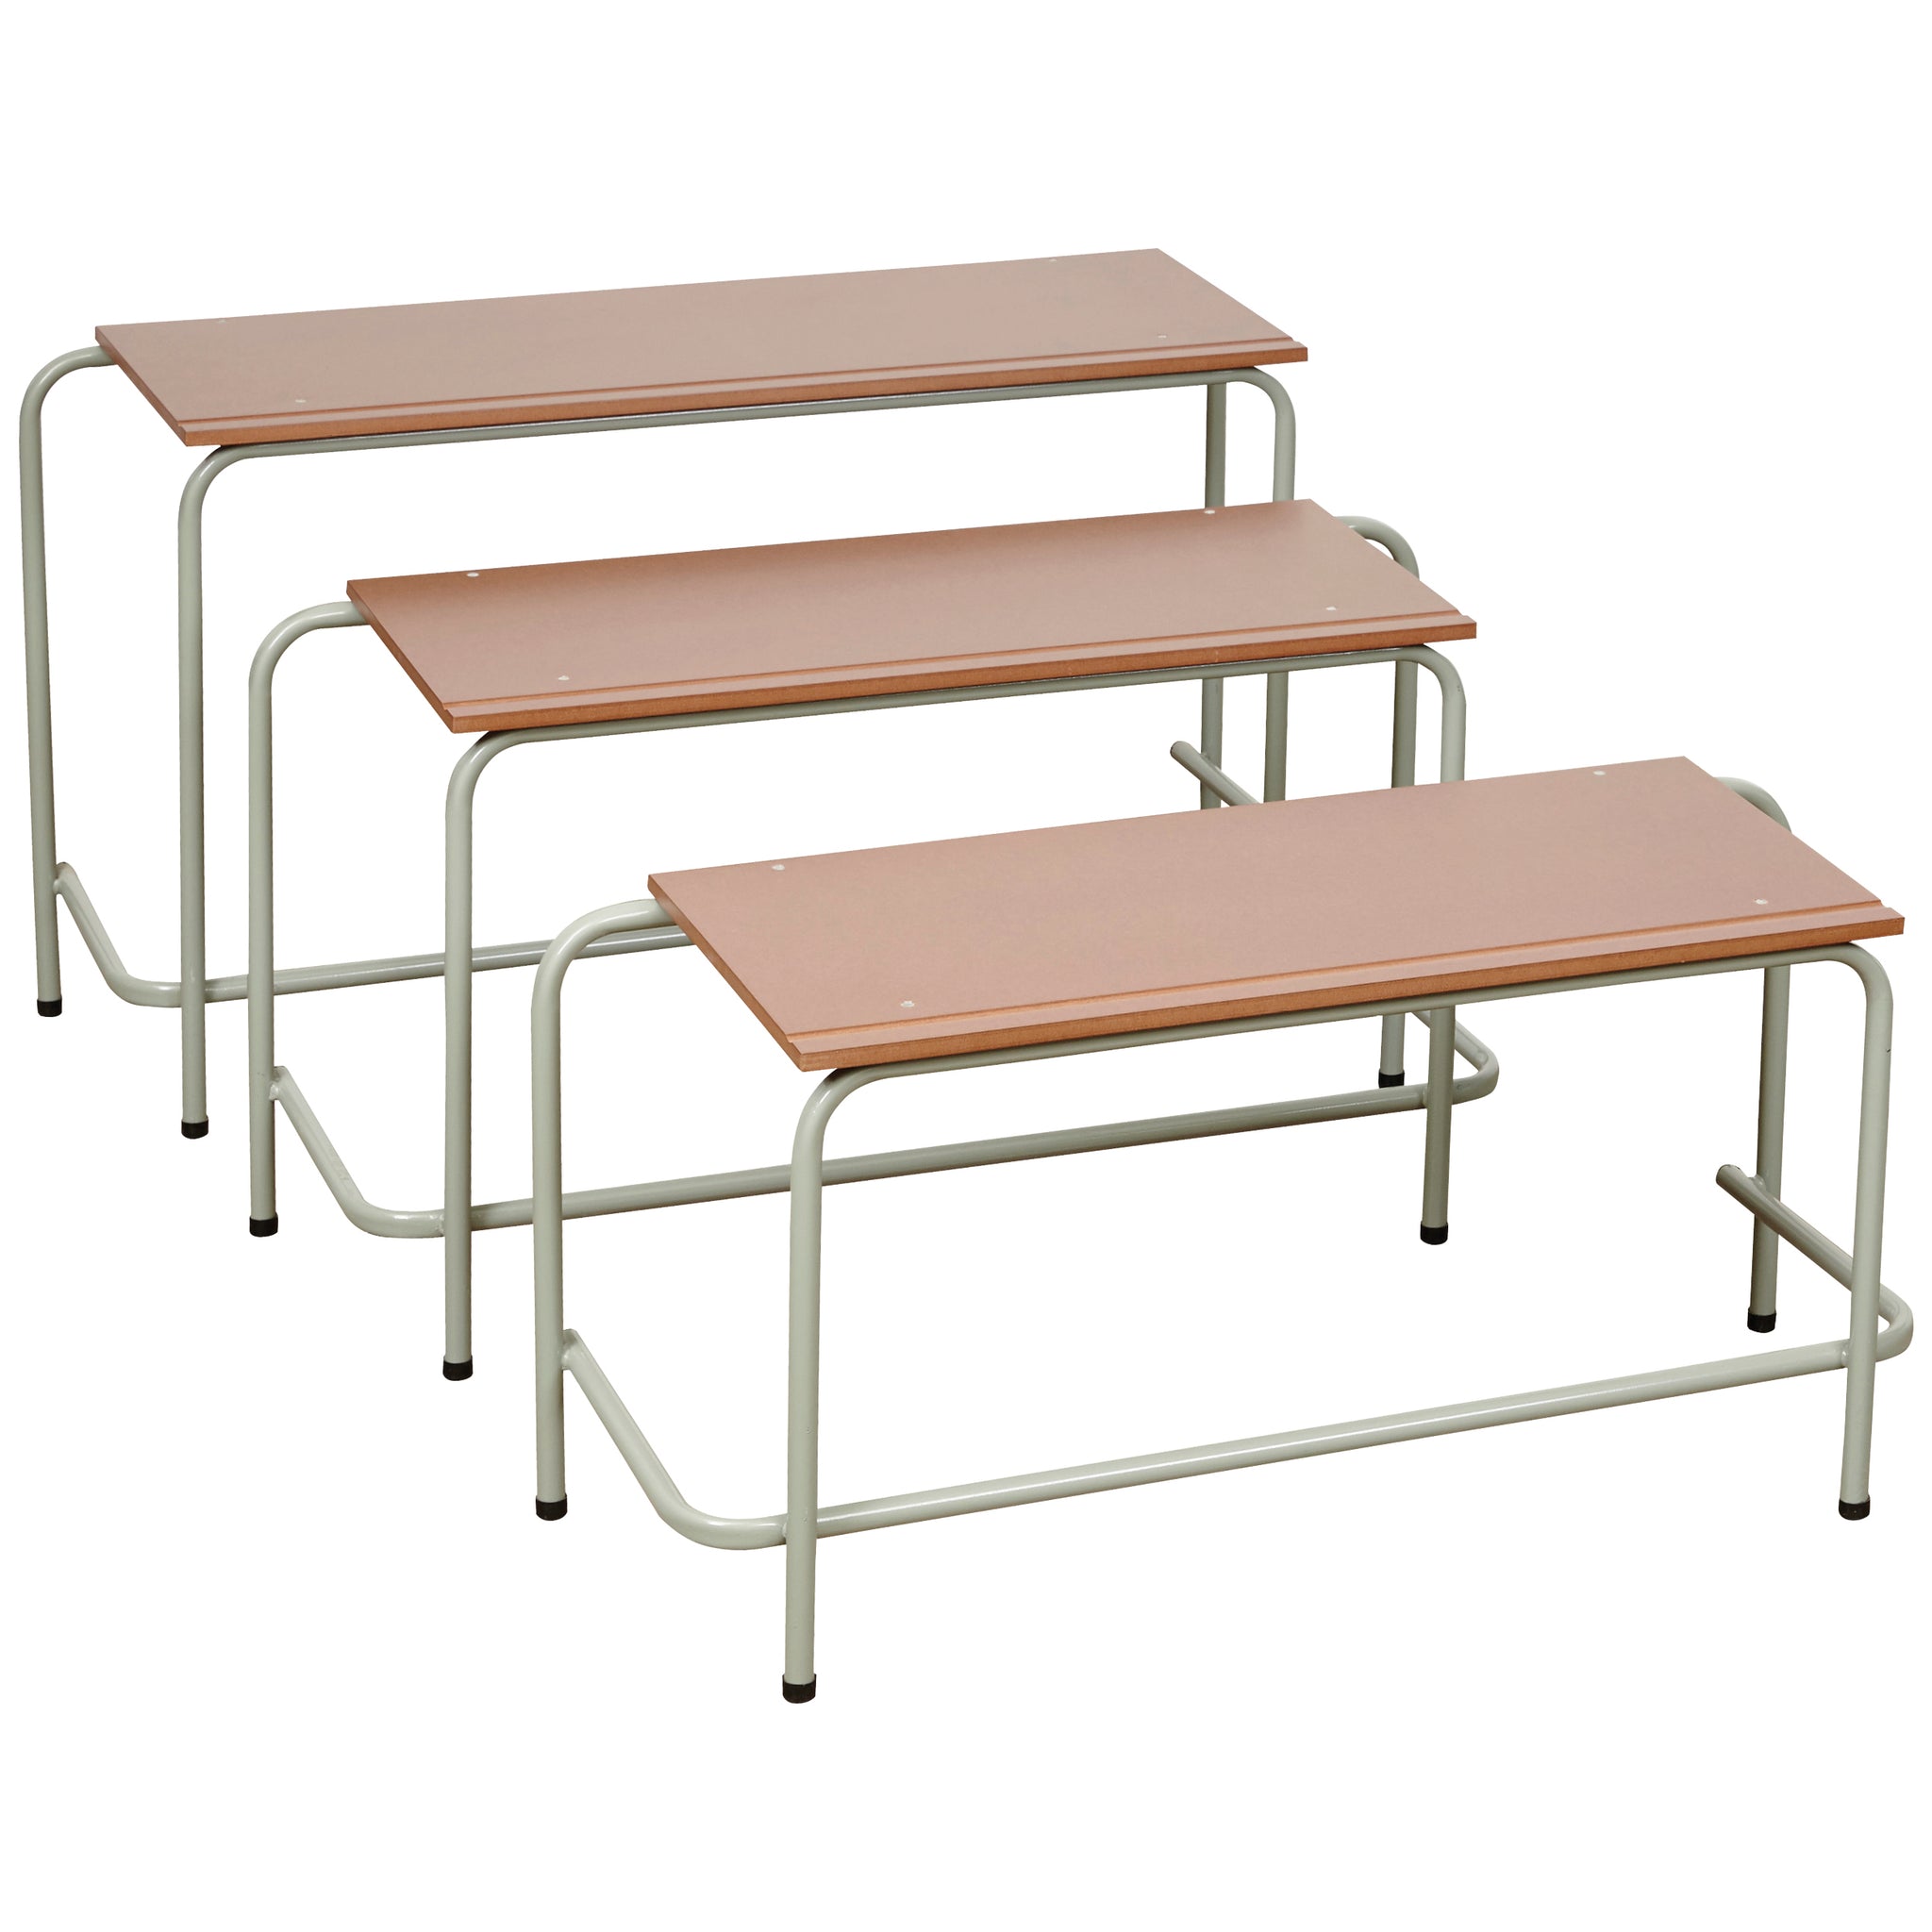 Hedcor School Table Double MDF